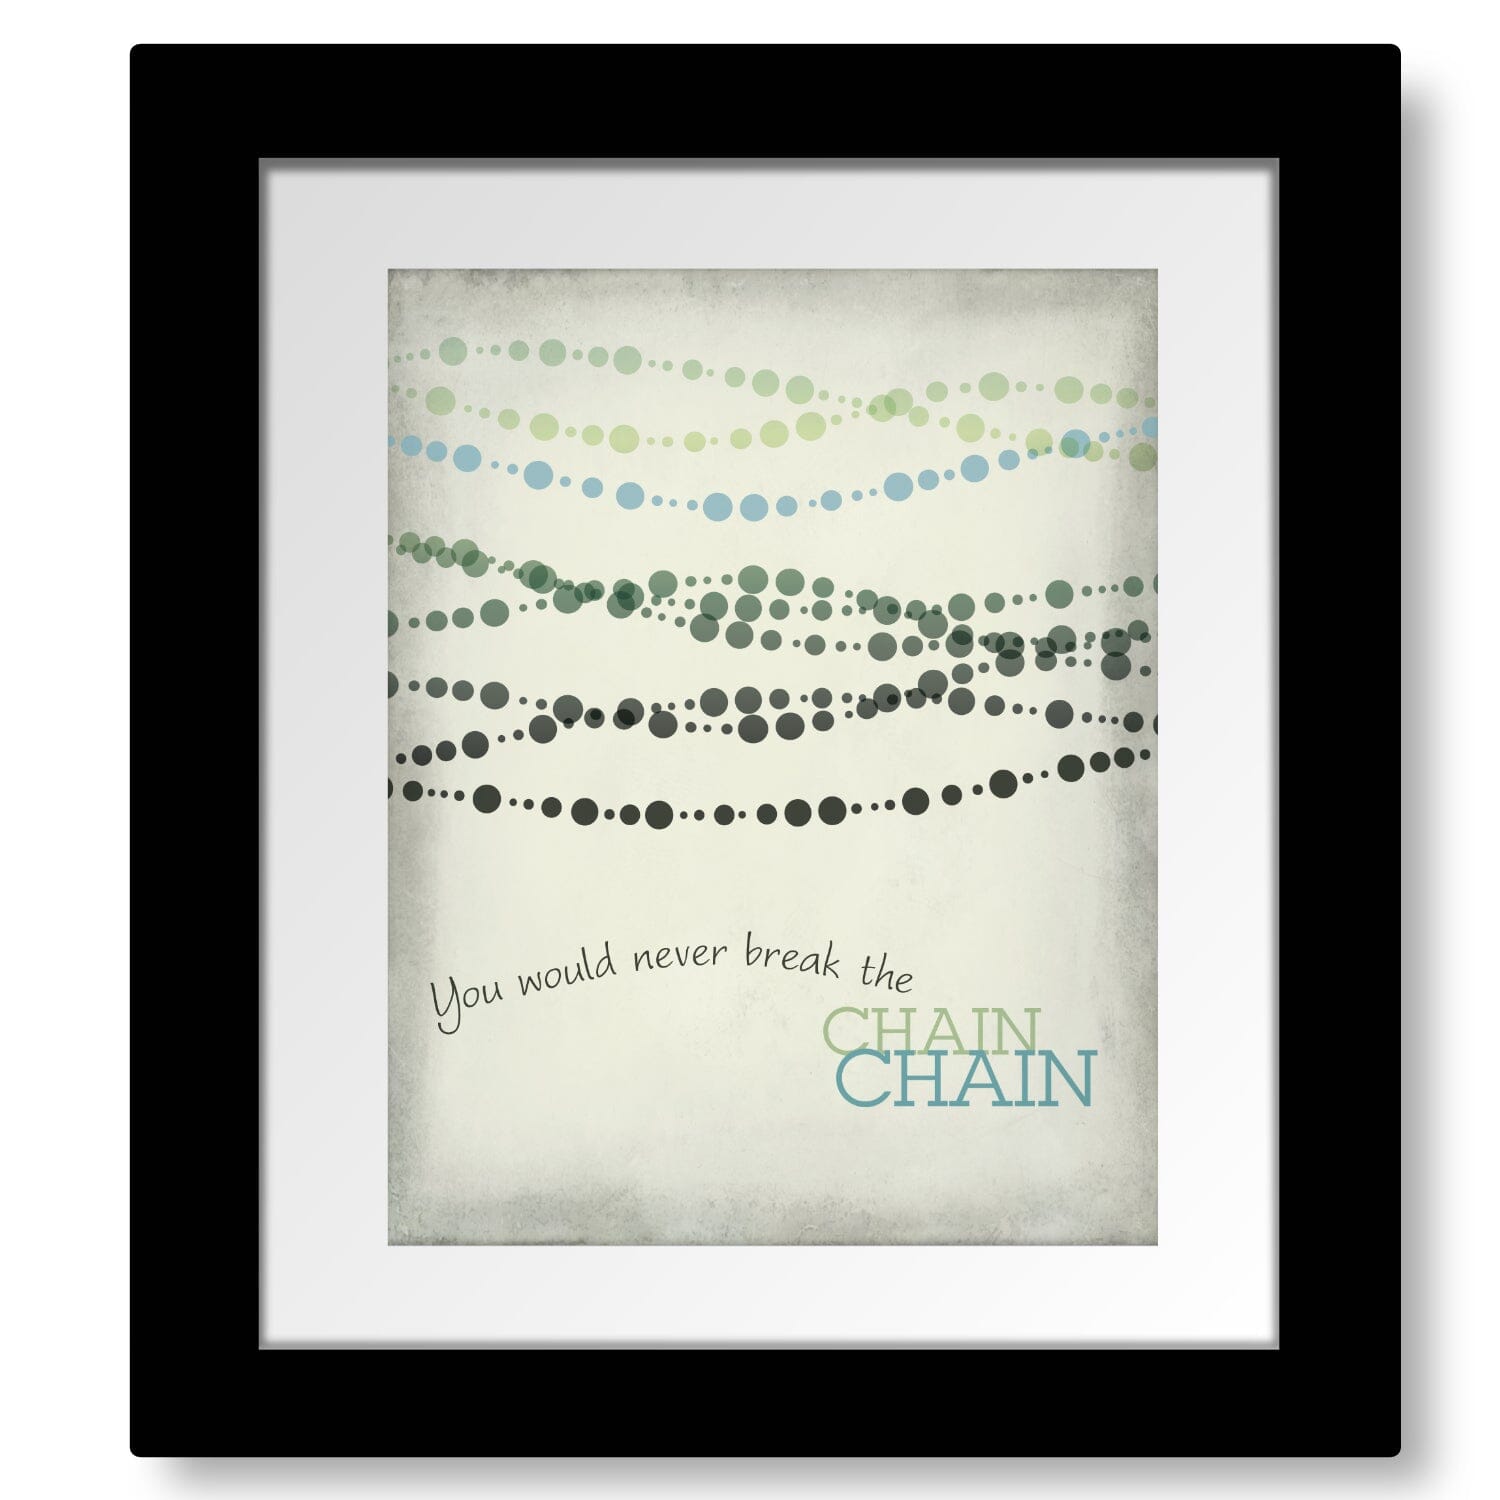 The Chain by Fleetwood Mac - Rock Music Song Lyric Print Song Lyrics Art Song Lyrics Art 8x10 Matted and Framed Print 